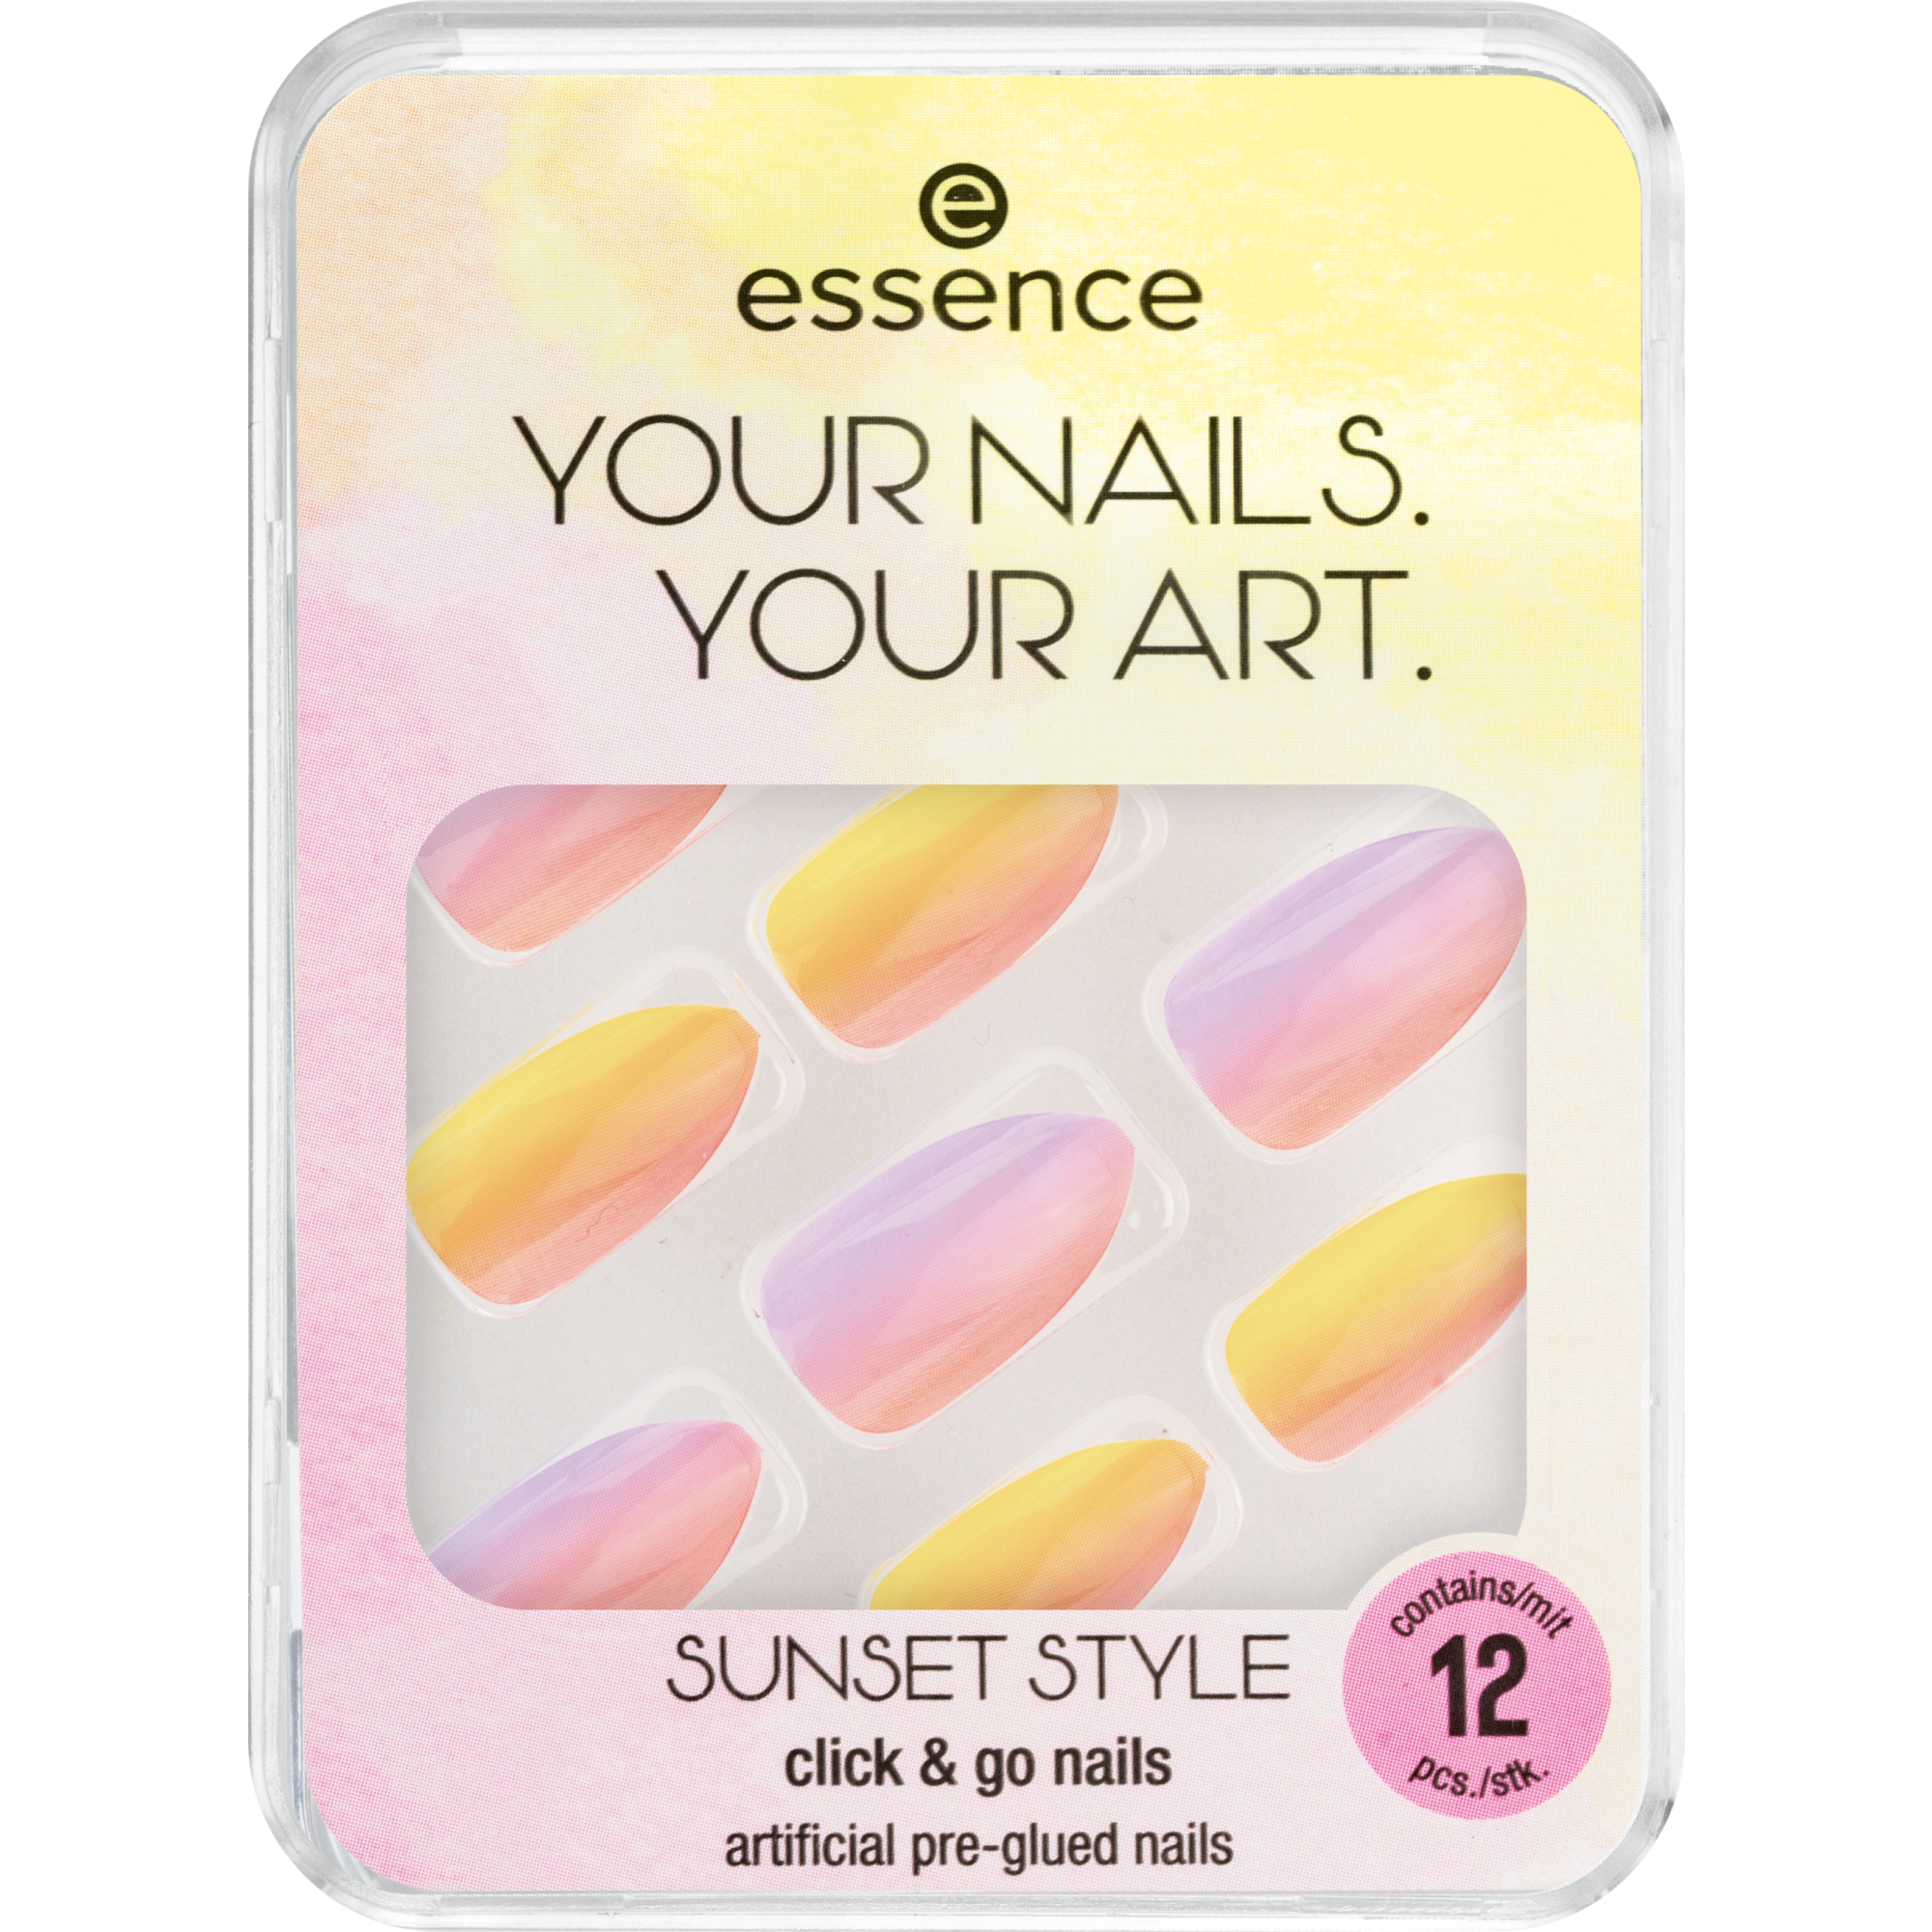 YOUR NAILS. YOUR ART. SUNSET STYLE click & go nails